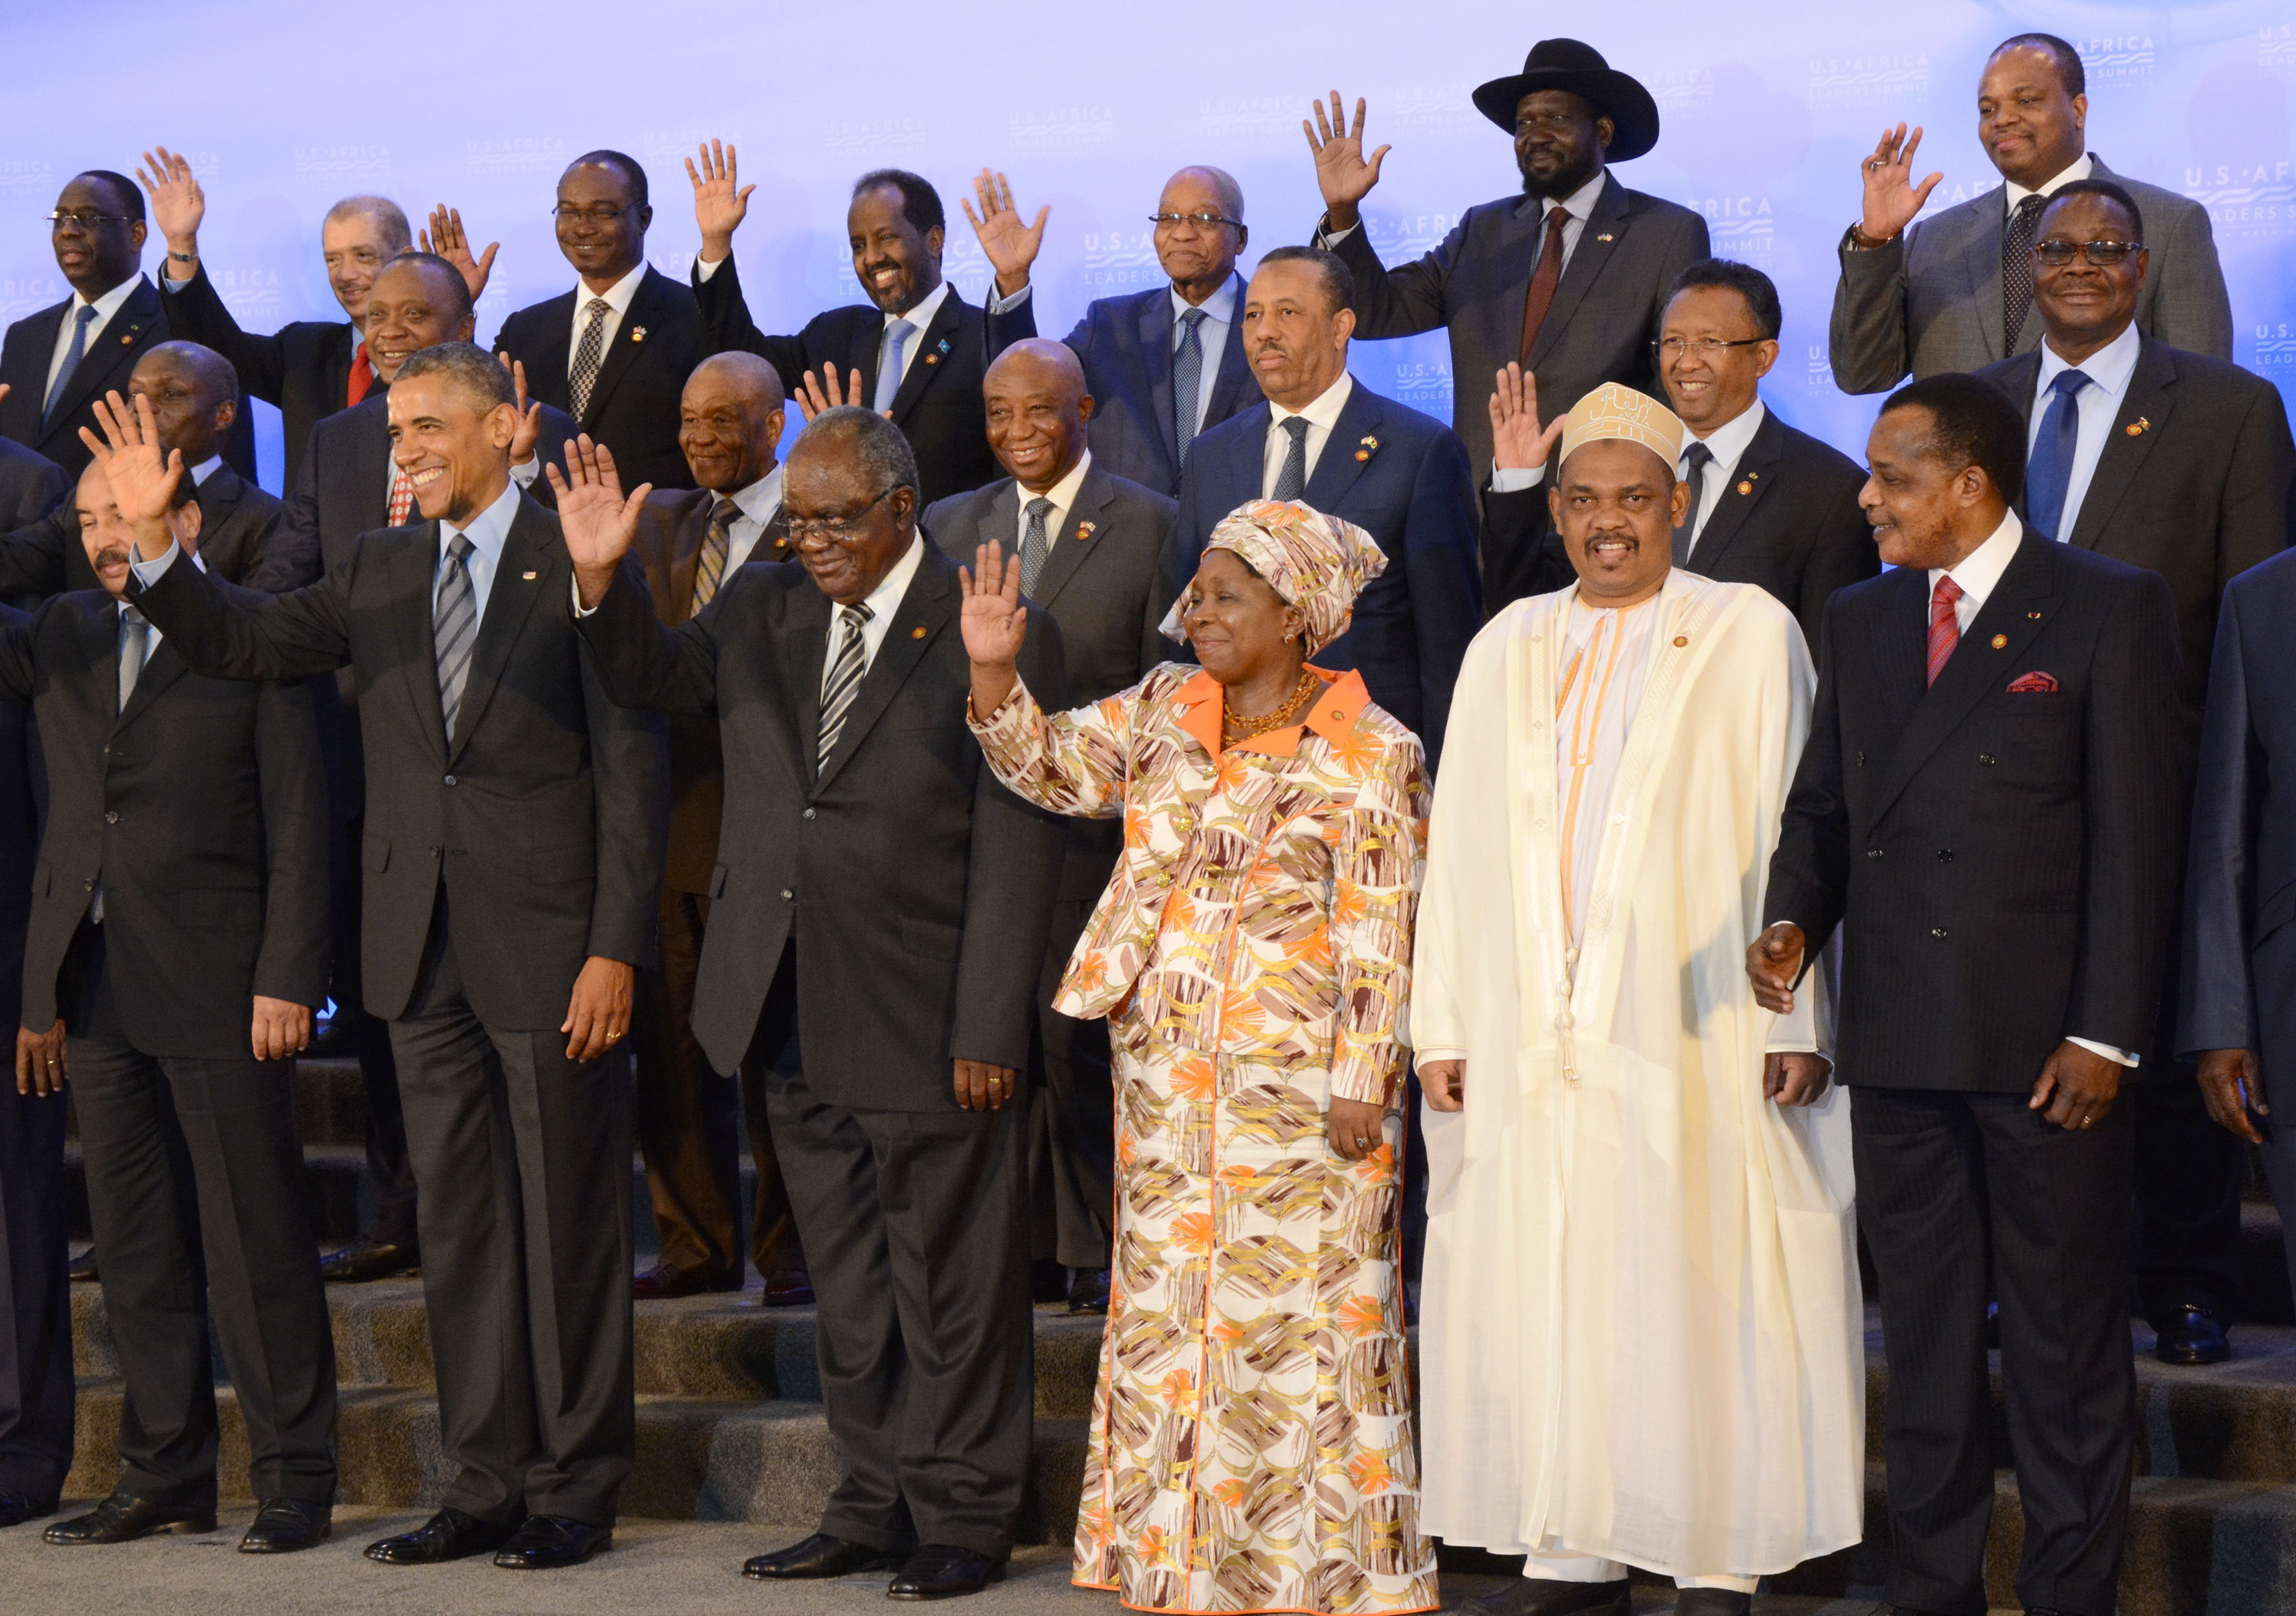 Washington’s Latest African Summit Why Obama Wants to Boost USAfrican